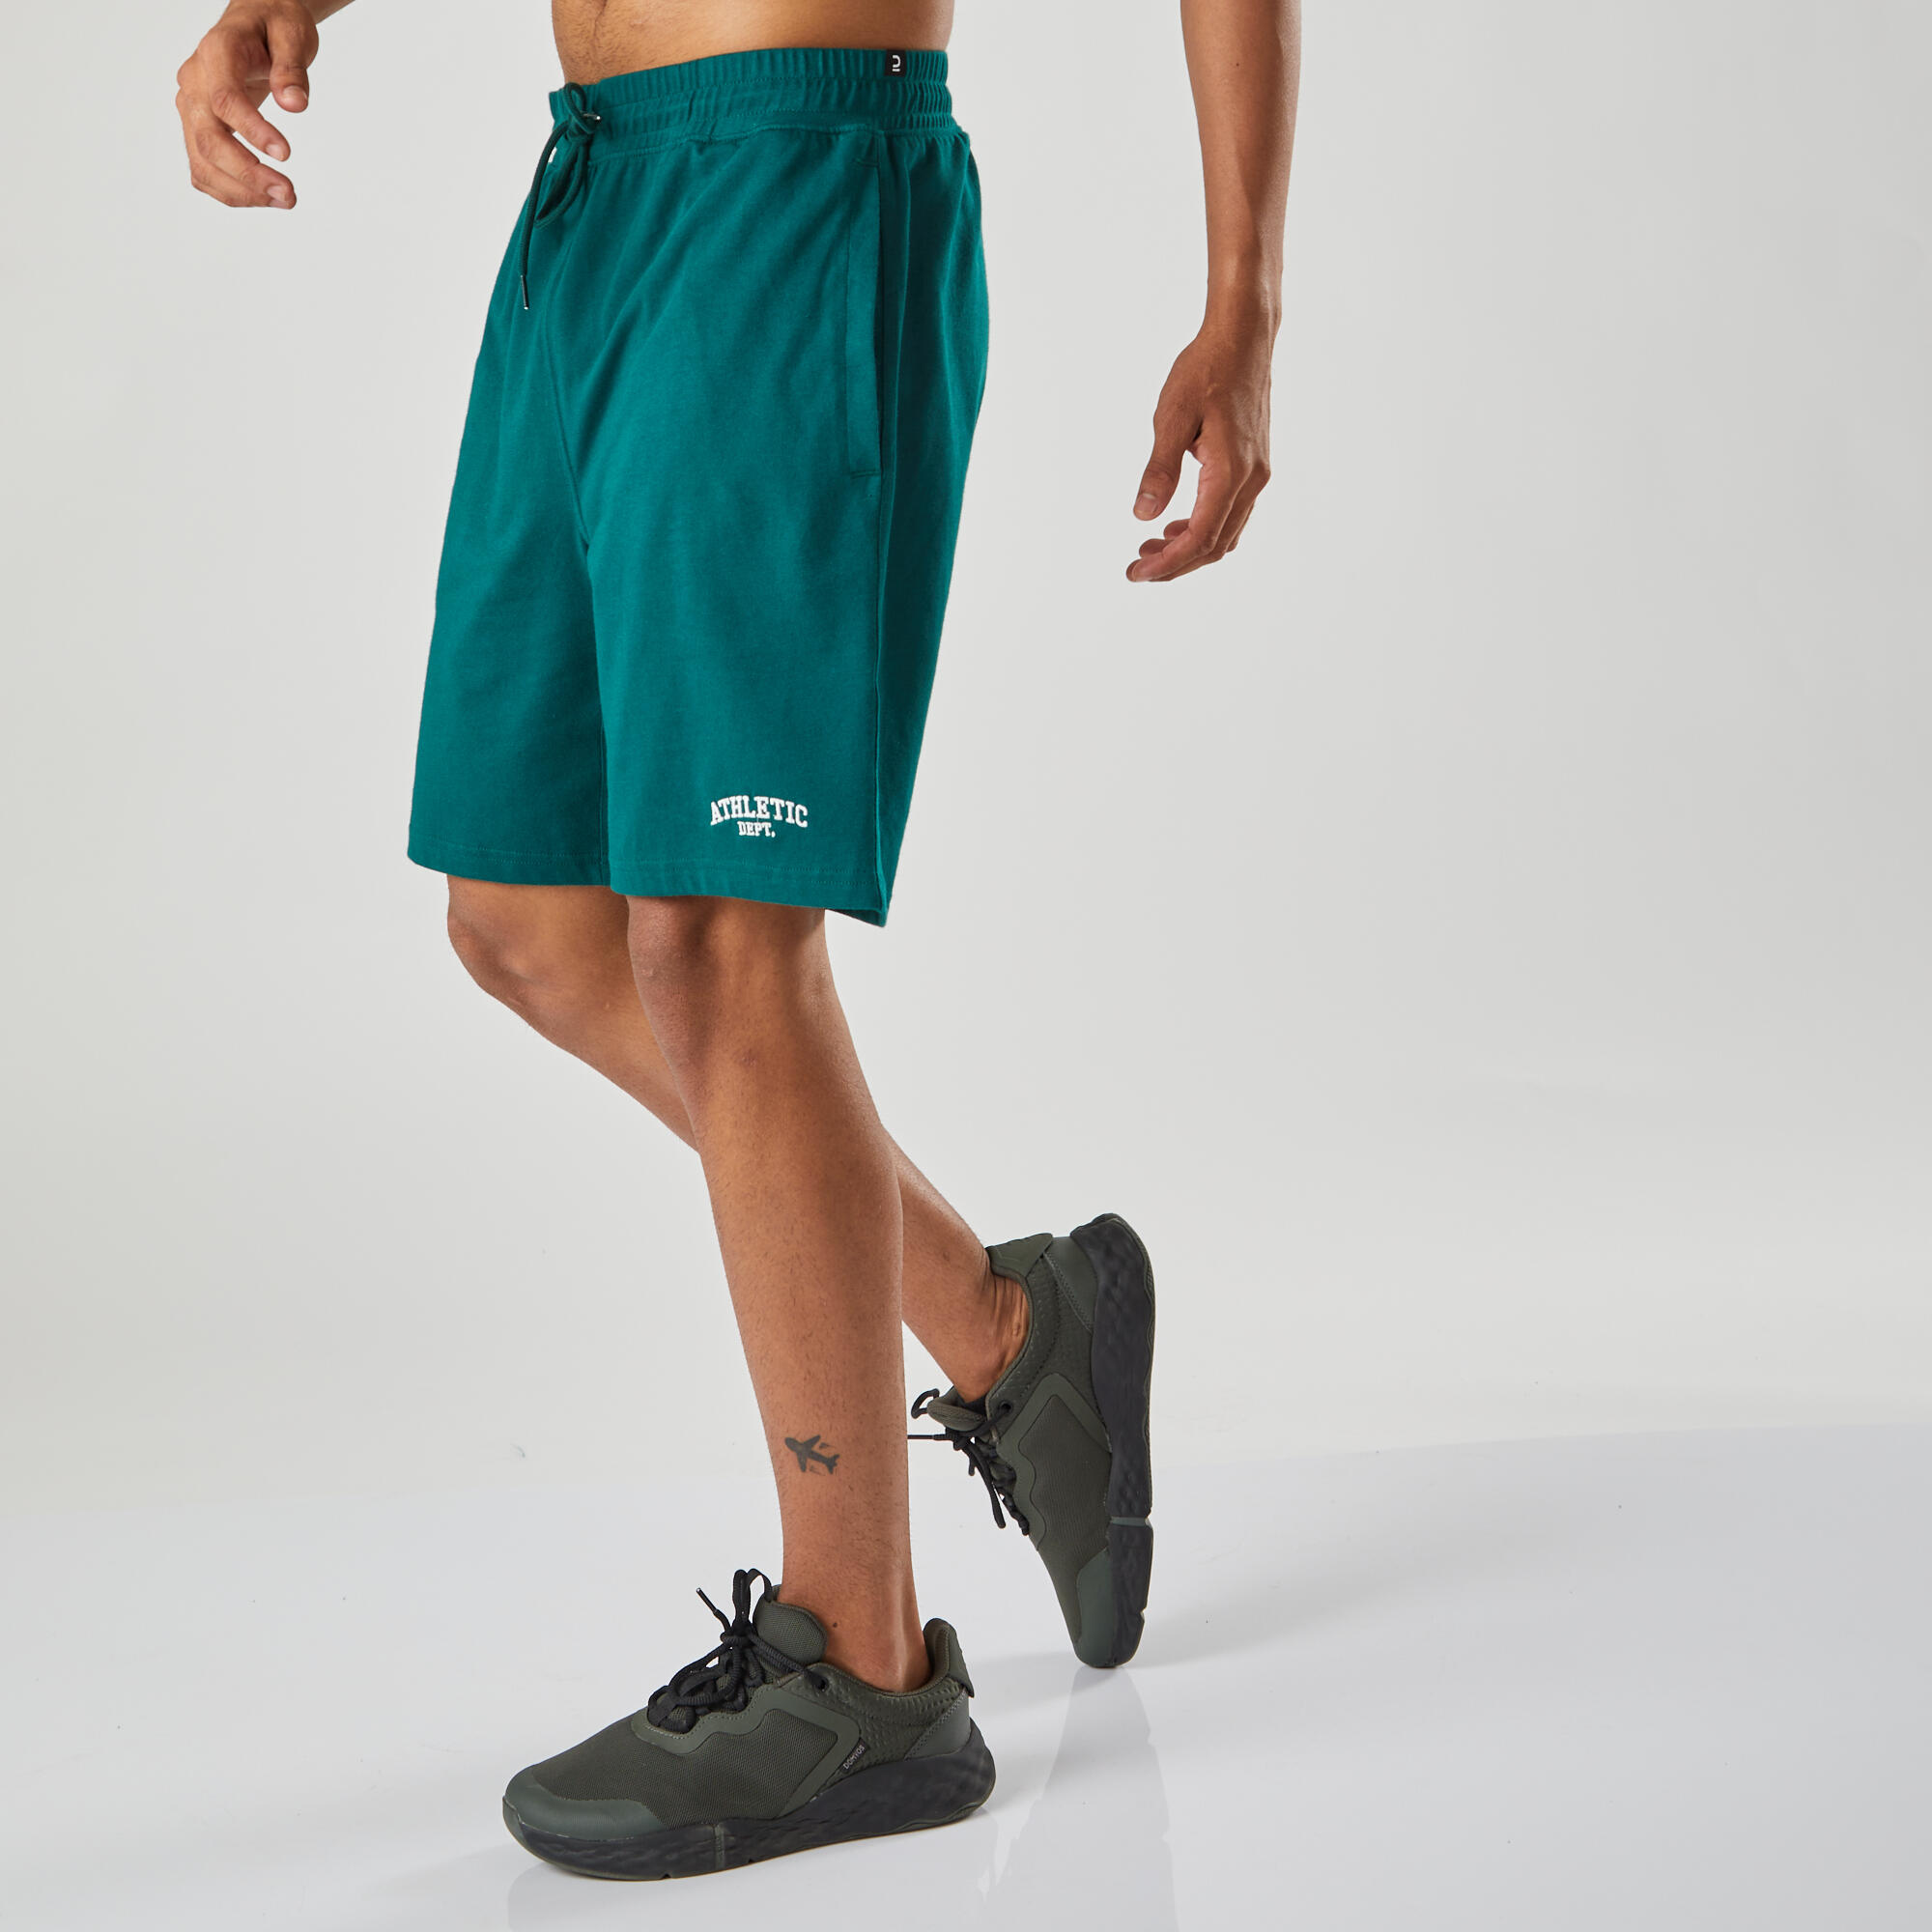 Deep Teal Green Gym Shorts - Size 6 – Owlete Active